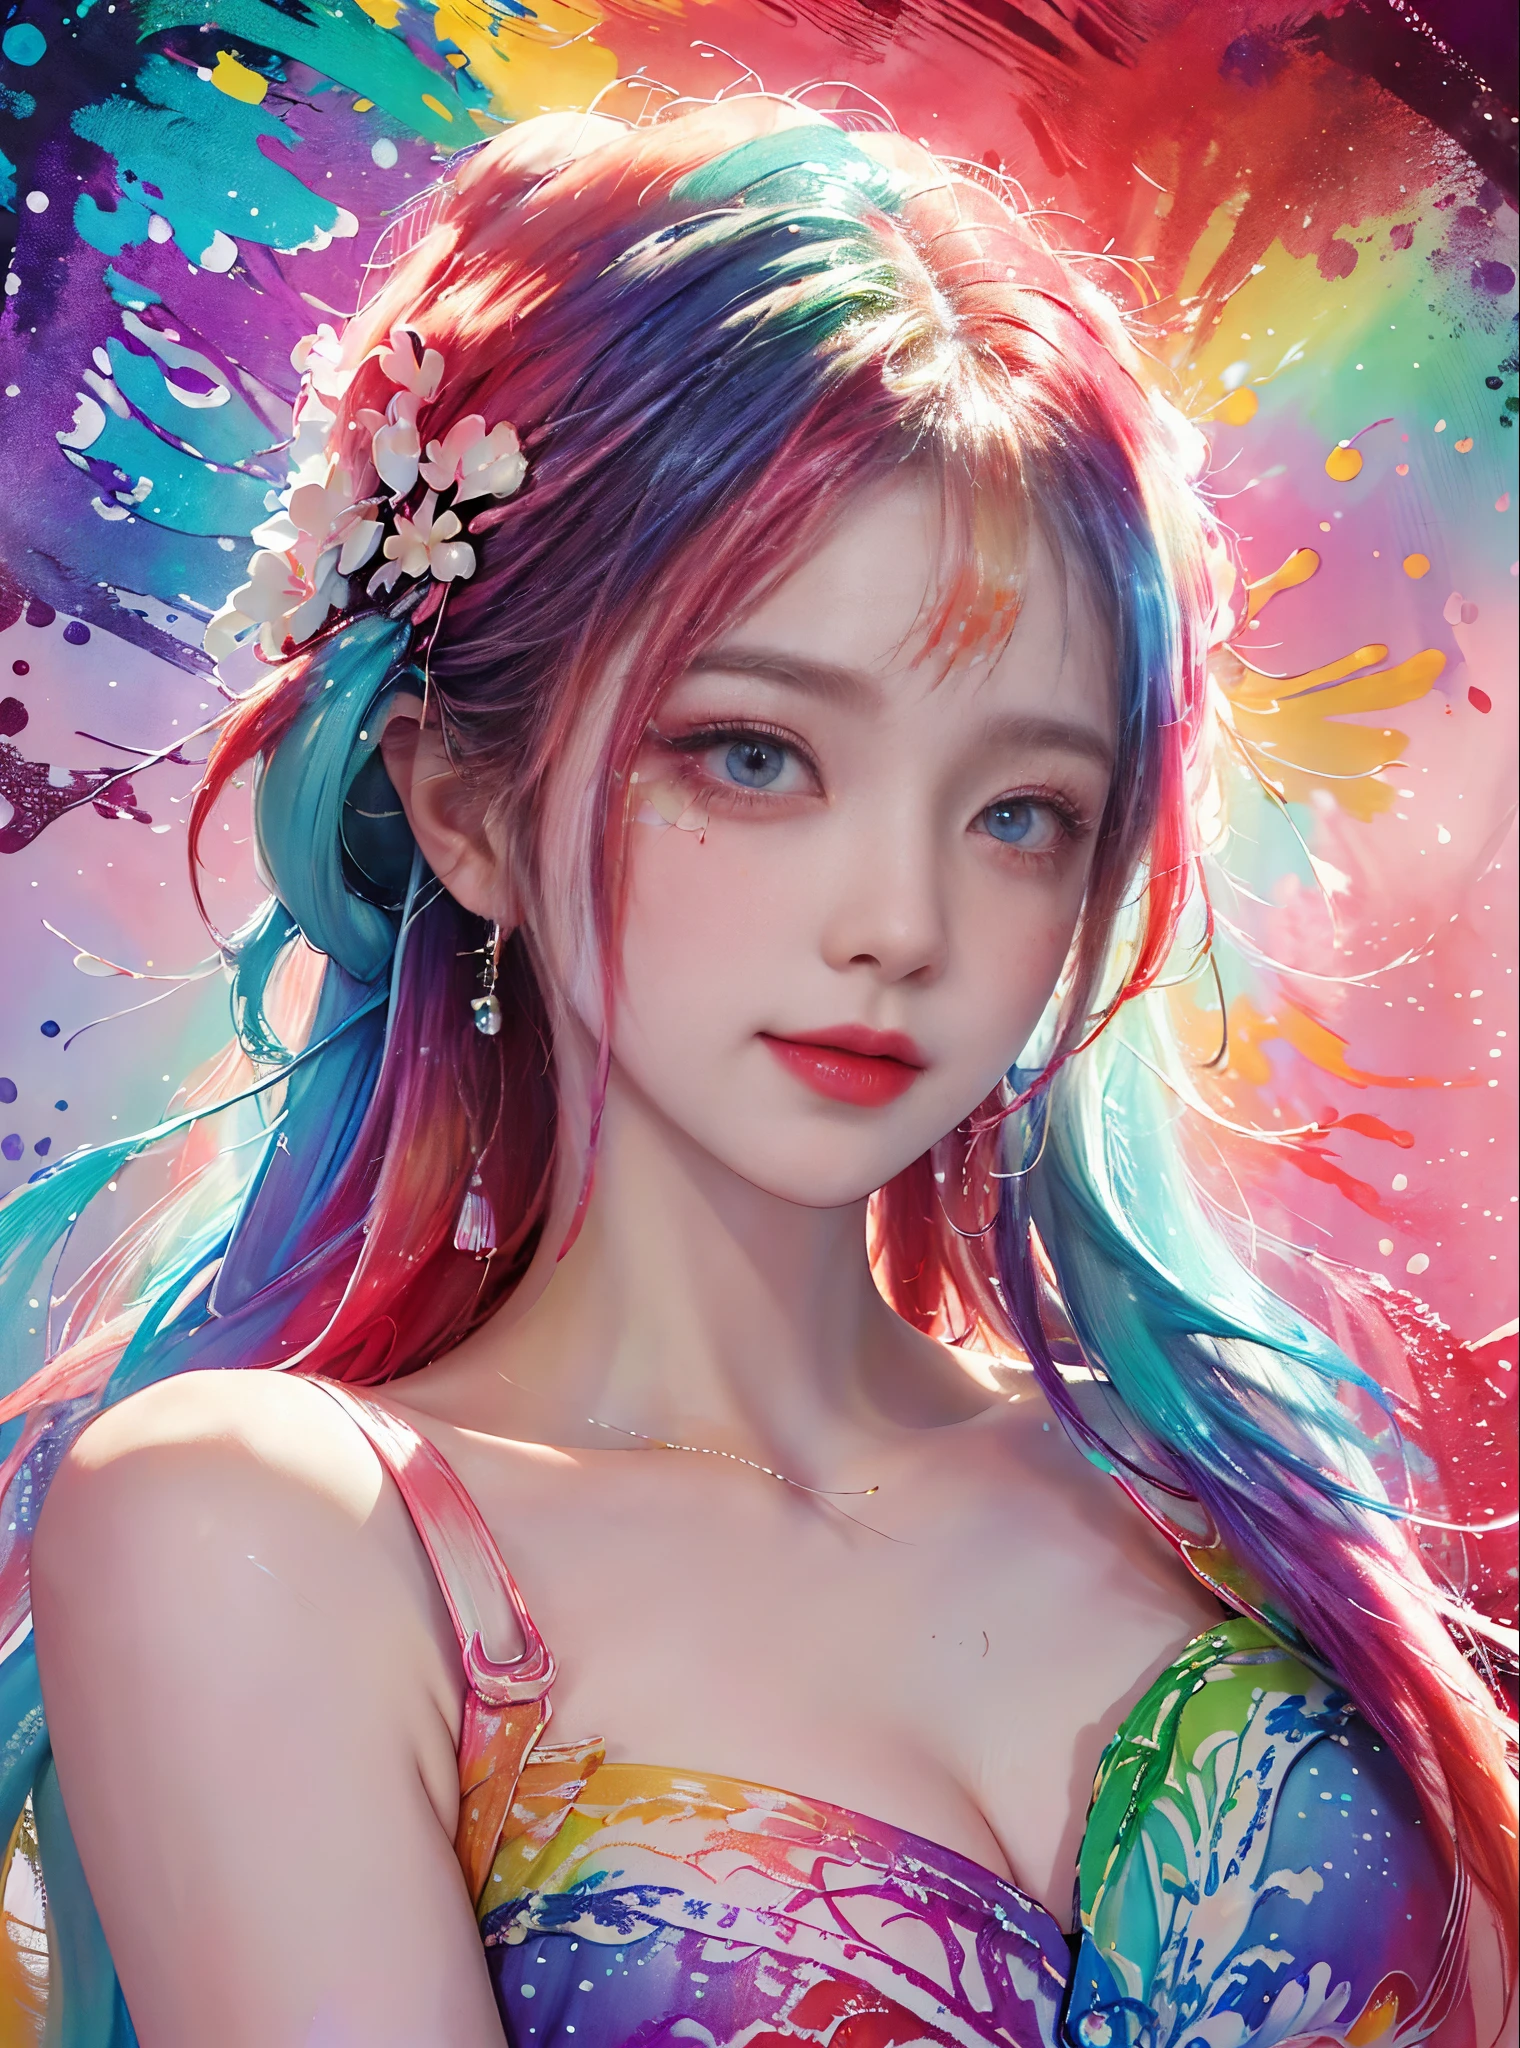 (Maste Piece, Top Quality, High Resolution), Background is Fractal Art, Rainbow Colored Eye, ((Paint Splashes, Color Splash, Ink Splash, Color Splash)), (Fractal Art), Sweet Chinese Girl , rainbow colored hair, peach lips, gentle smile, front, upper body